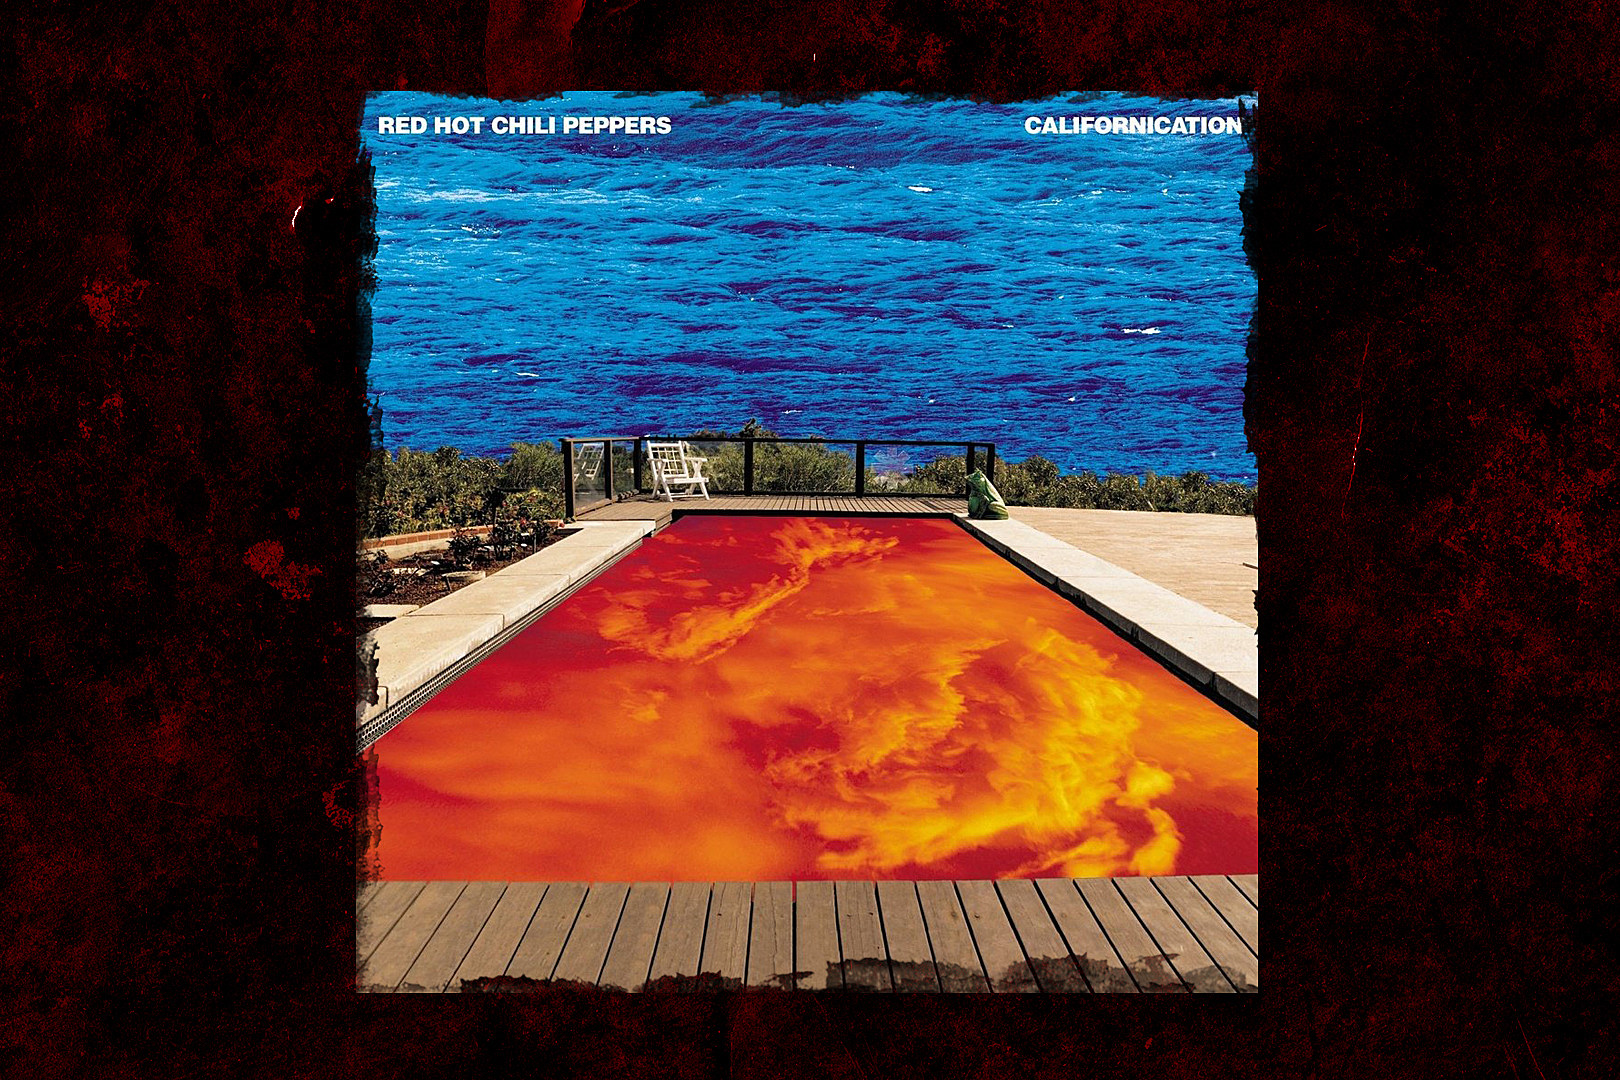 21 Years Ago: Red Hot Chili Peppers Issue 'Californication'